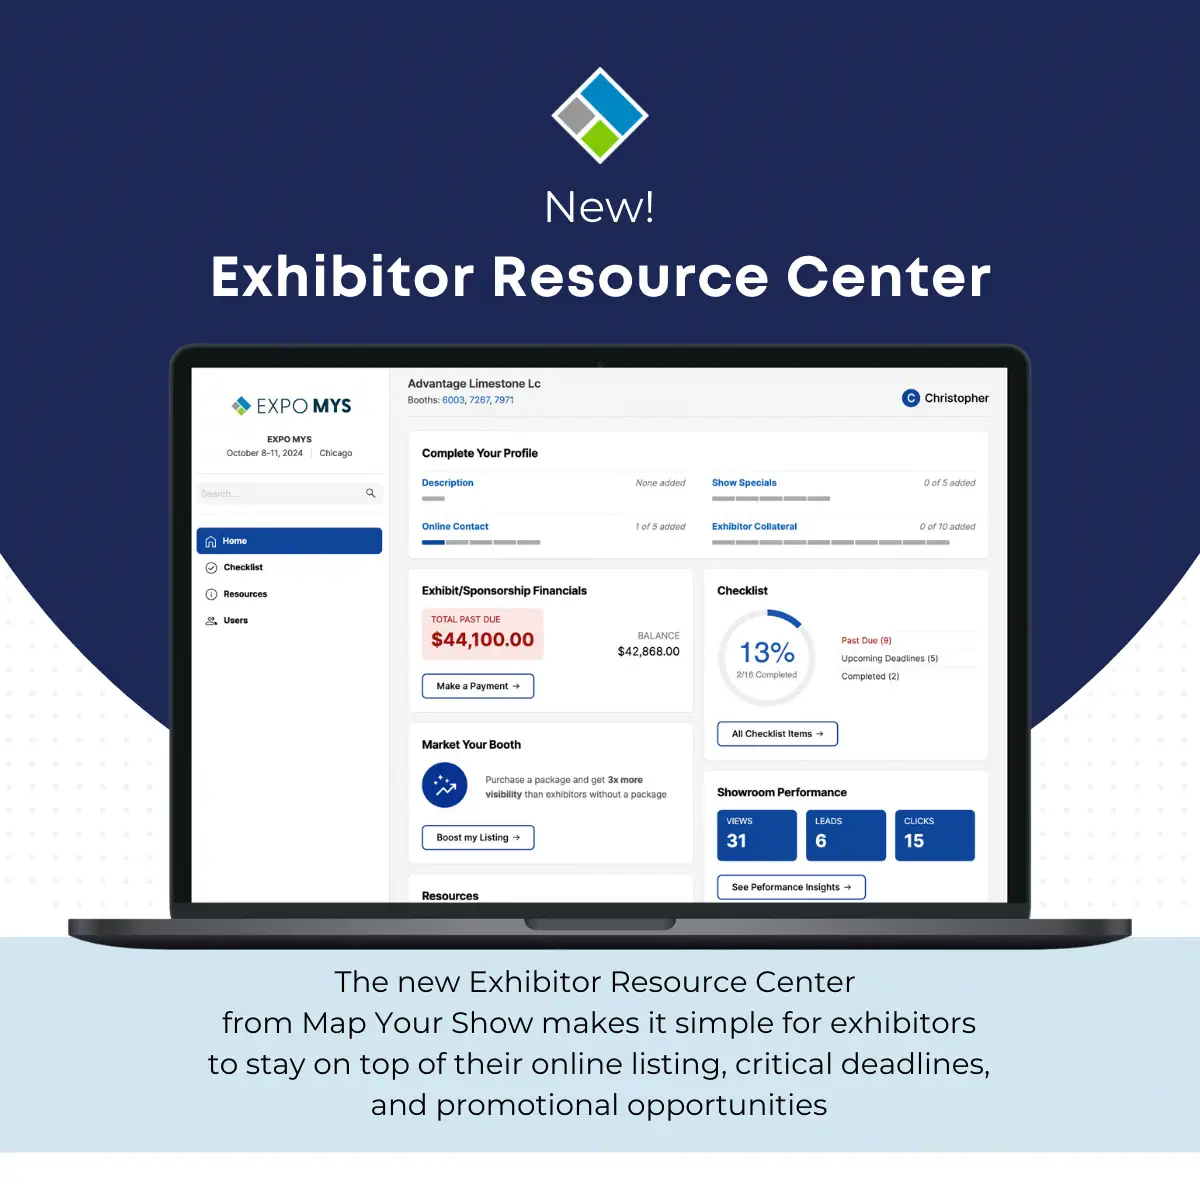 Map Your Show Exhibitor Resource Center Receives Upgrades to Organize and Communicate with Exhibitors and Sponsors